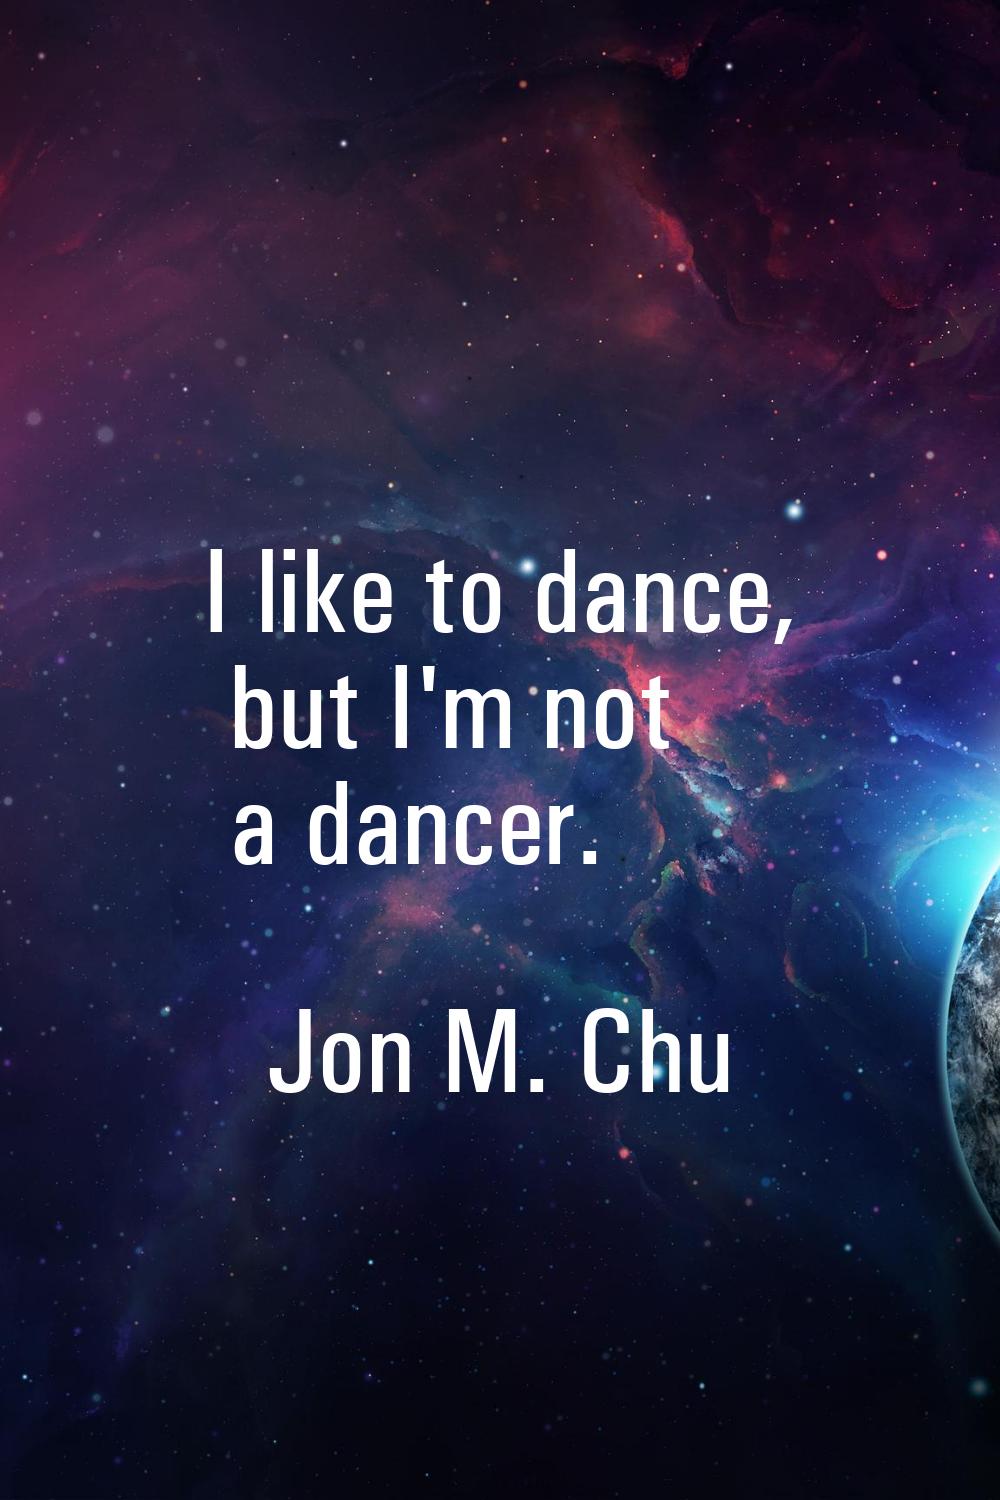 I like to dance, but I'm not a dancer.